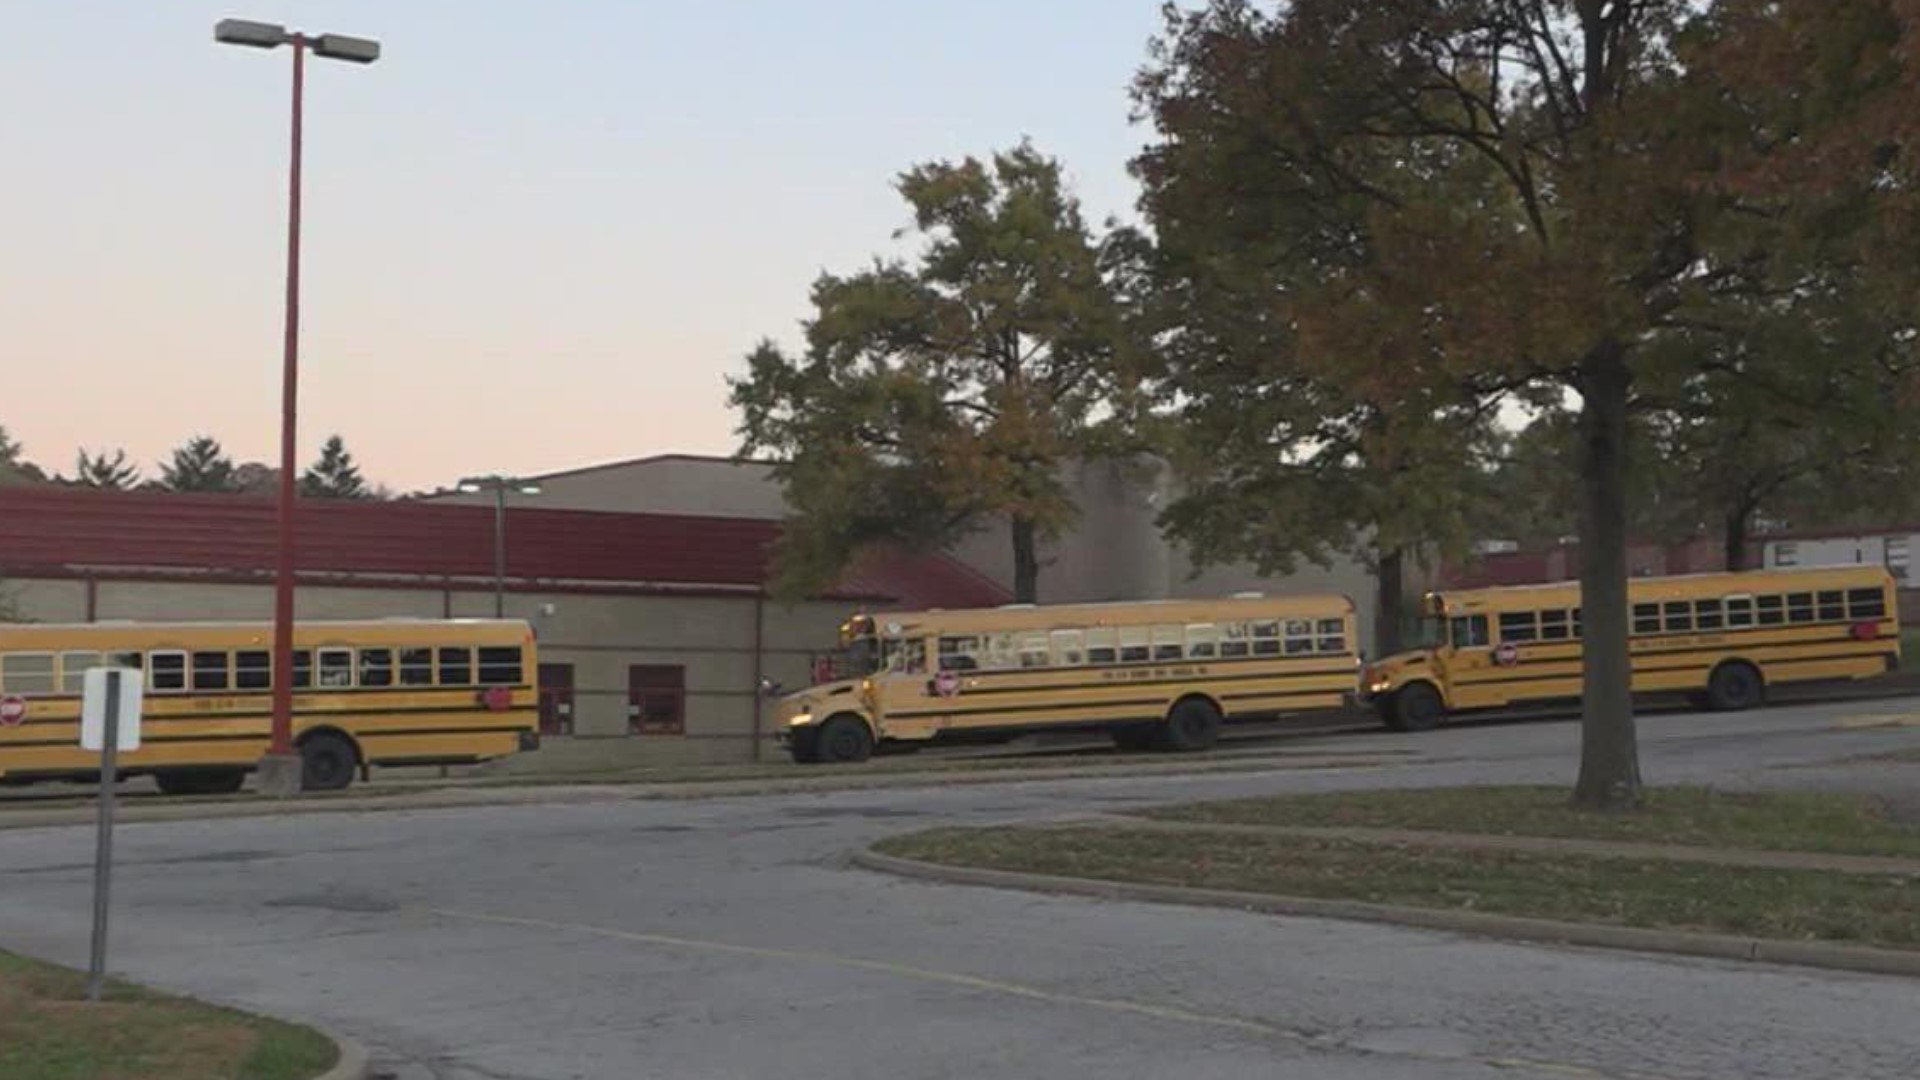 A bus driver shortage is forcing changes in the Fox C-6 district. School starts the week of Aug. 22, and some students will be ineligible for bus transportation.